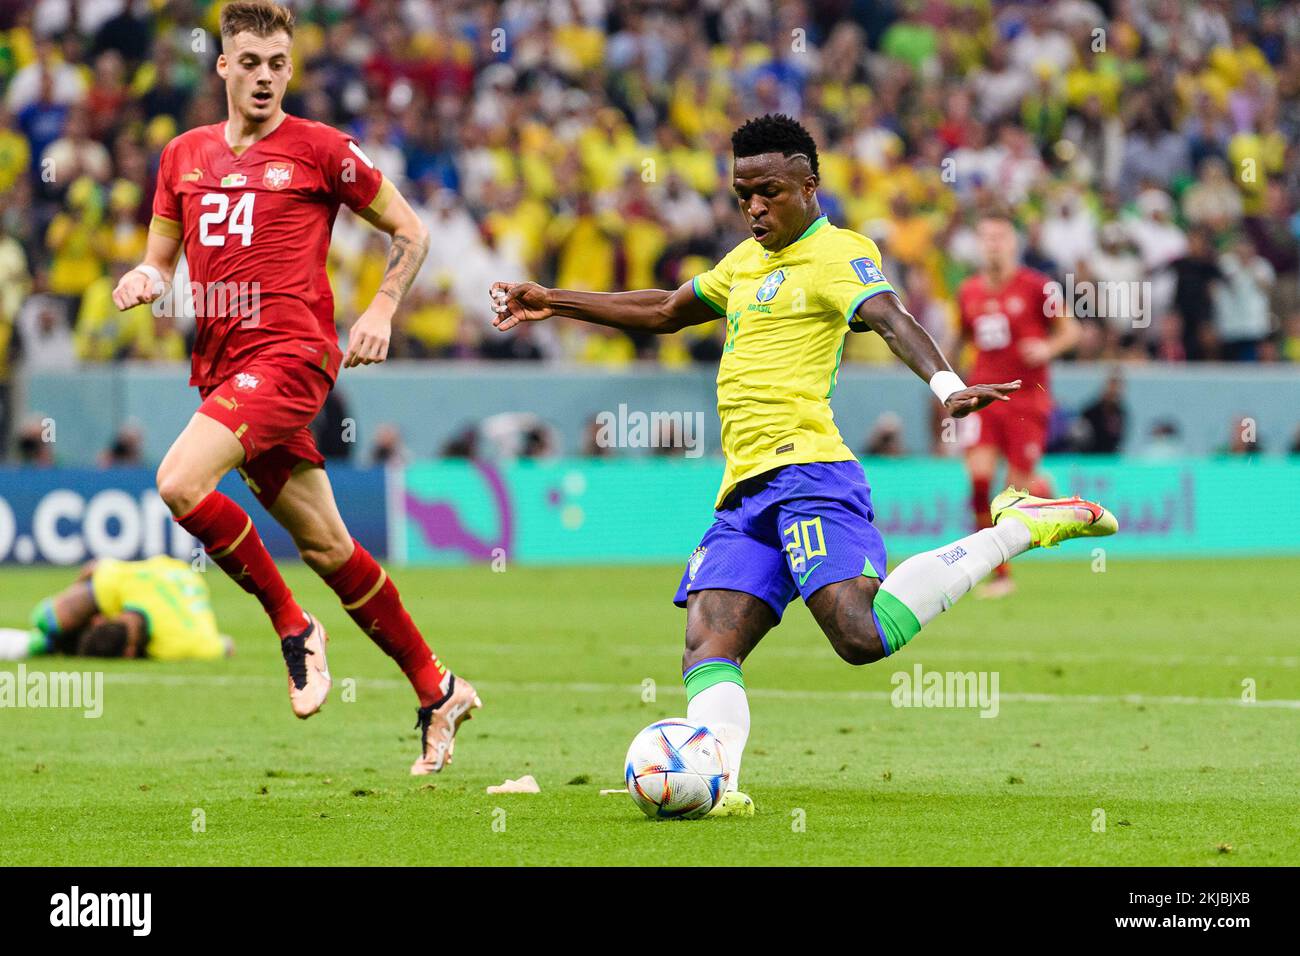 Lusail, Qatar. 24th Nov, 2022. Lusail, Qatar, Nov 25th 2022: Vinicius Junior of Brazil during a match between Brazil vs Serbia, valid for the group stage of the World Cup, held at the Lusail National Stadium in Lusail, Qatar. (Marcio Machado/SPP) Credit: SPP Sport Press Photo. /Alamy Live News Stock Photo